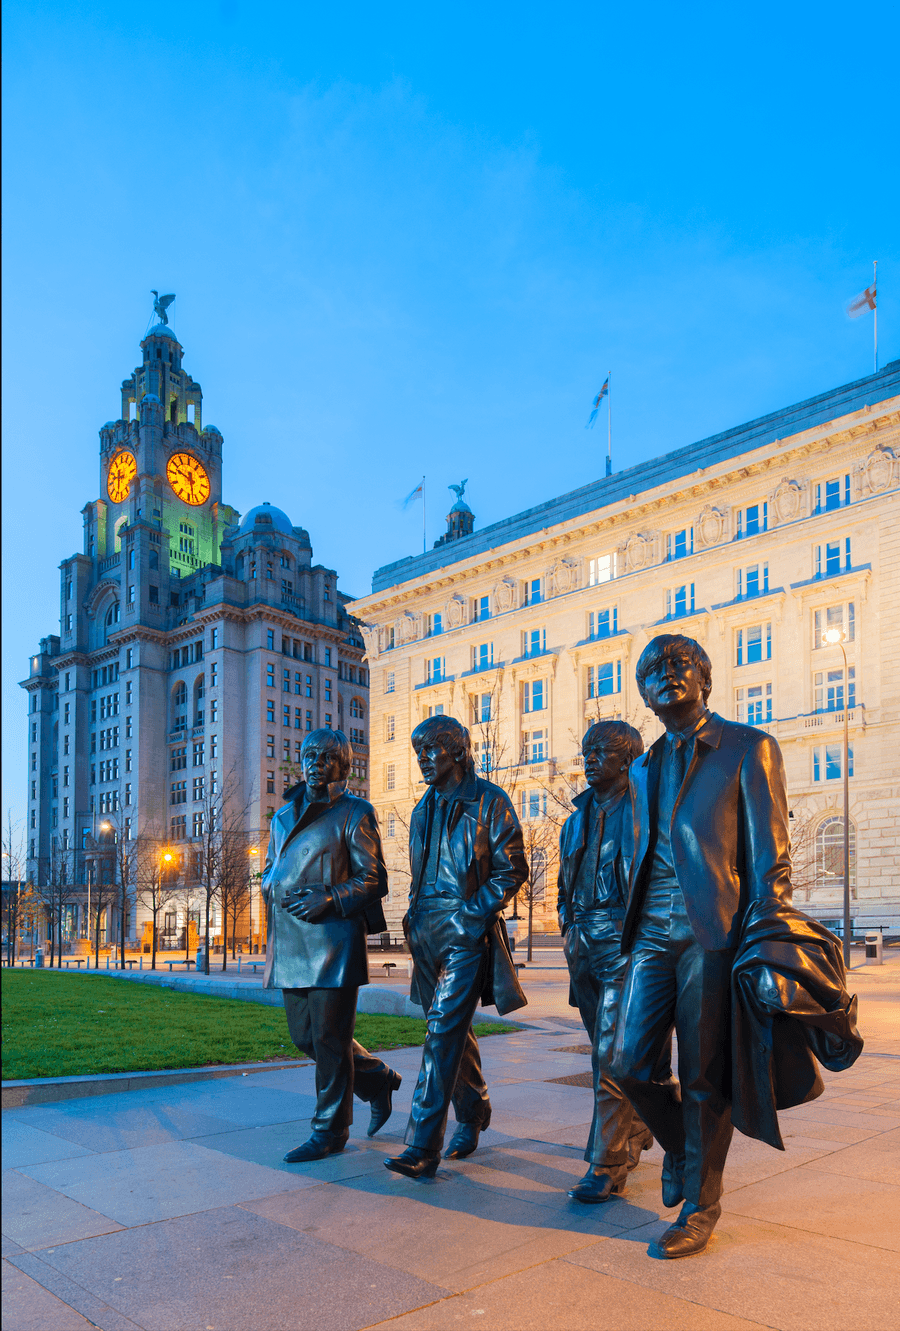 Liverpool city is blooming marvellous as it commences GDS-Indexing